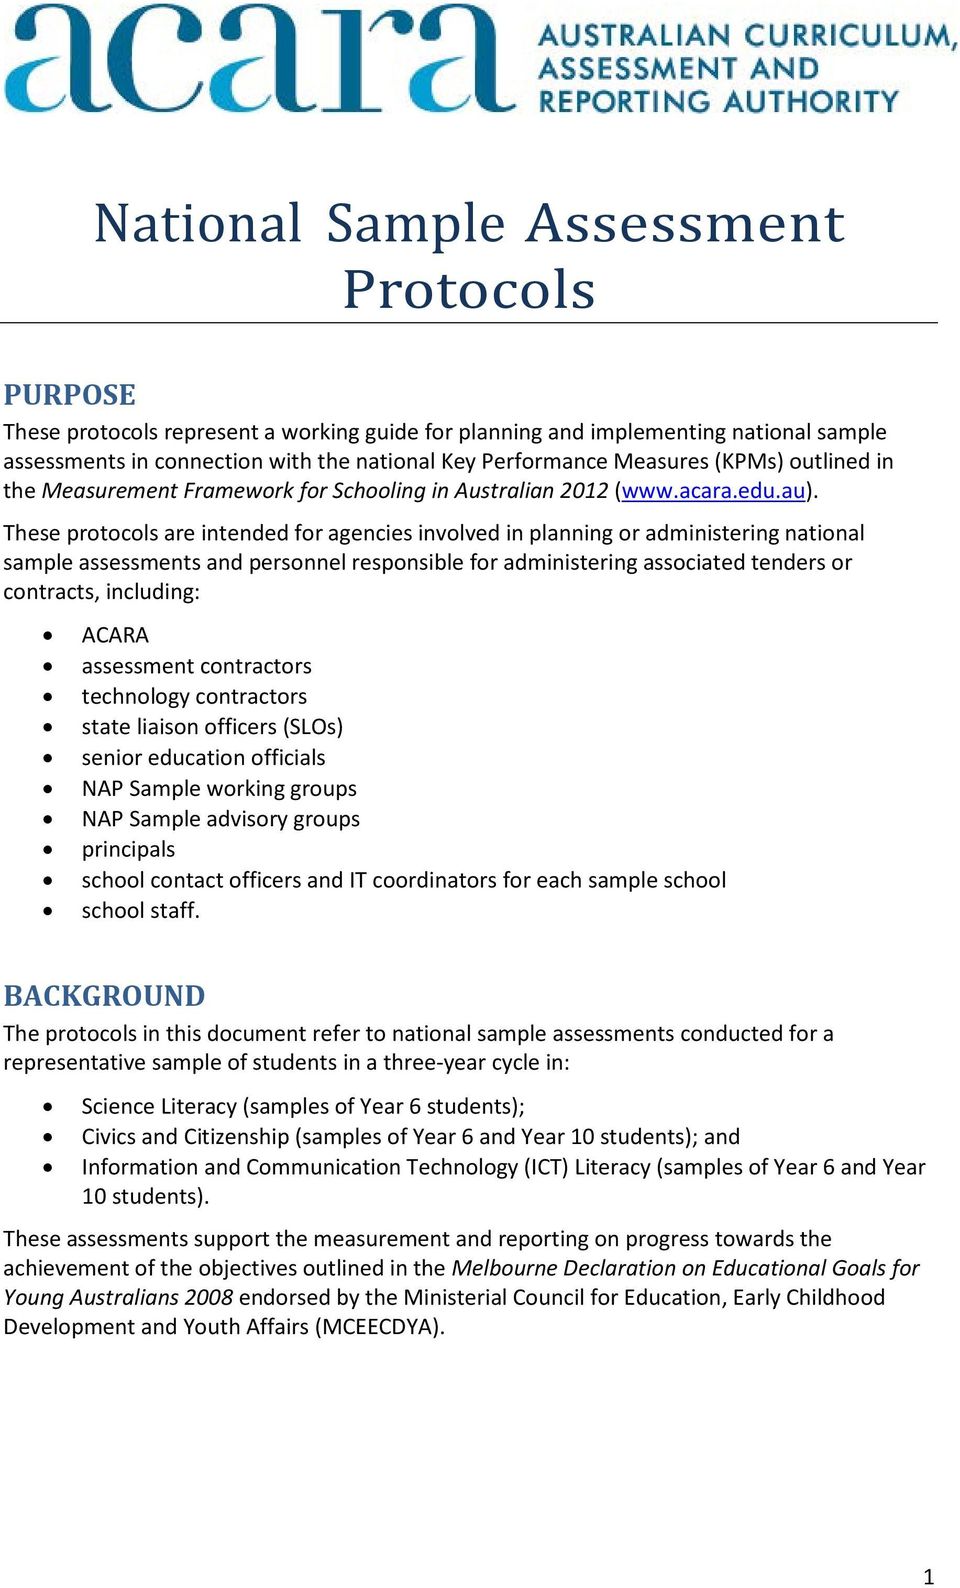 These protocols are intended for agencies involved in planning or administering national sample assessments and personnel responsible for administering associated tenders or contracts, including: